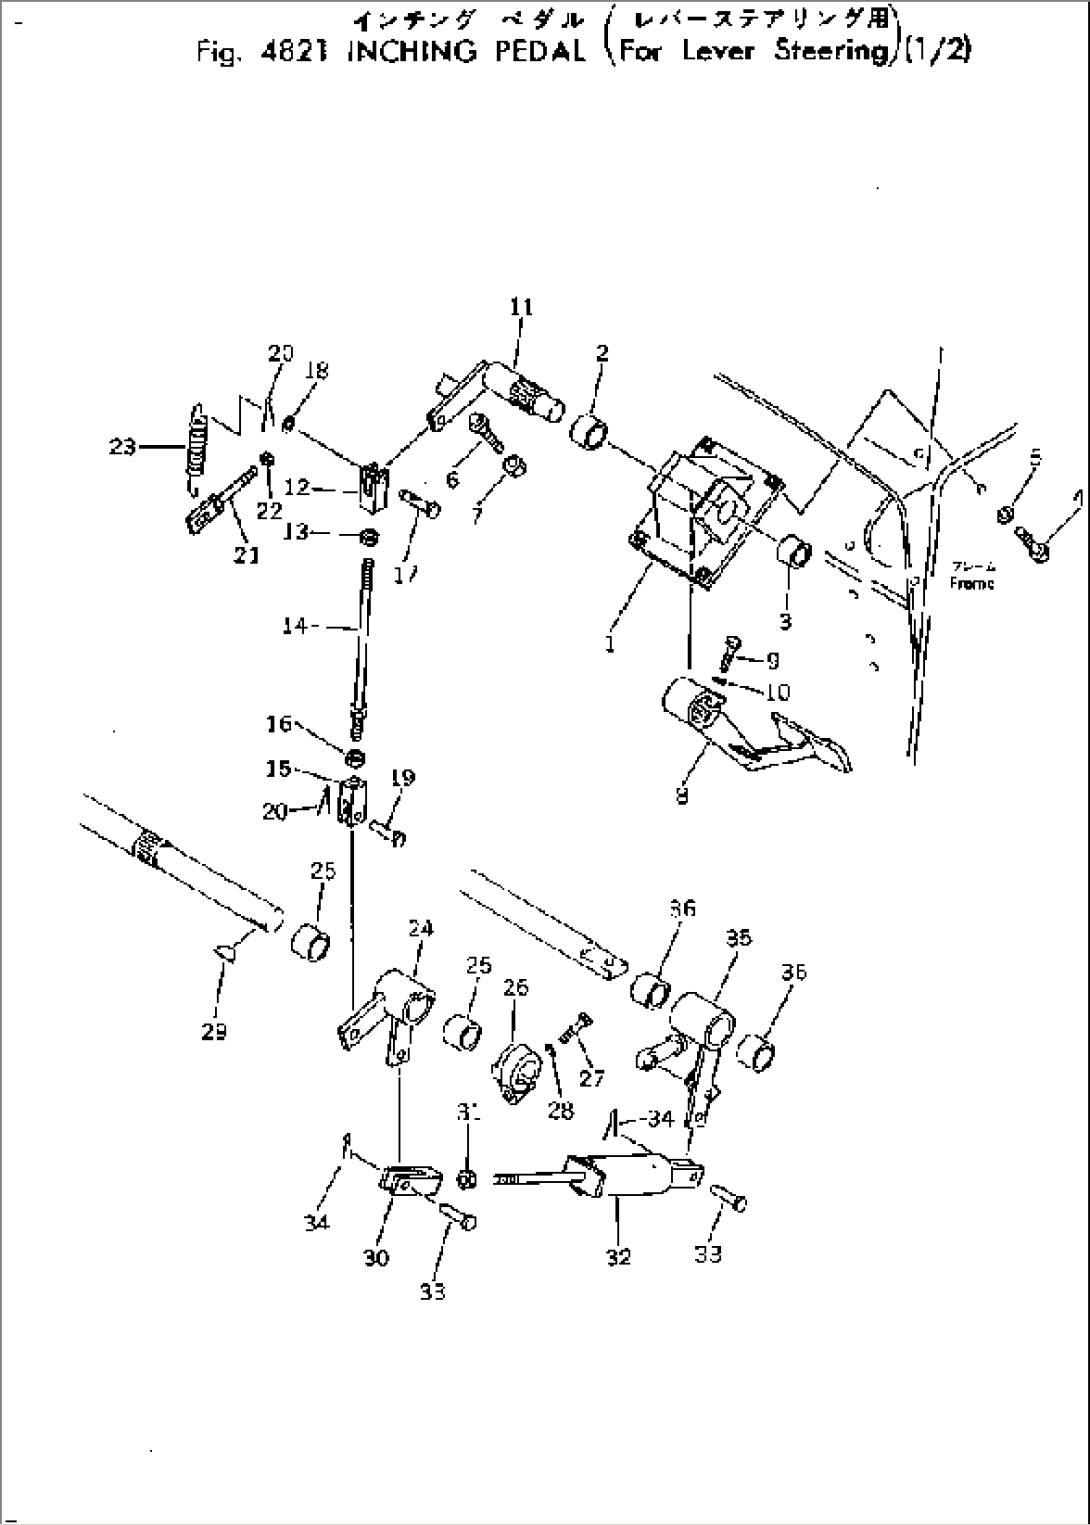 INCHING PEDAL (FOR LEVER STEERING) (1/2)